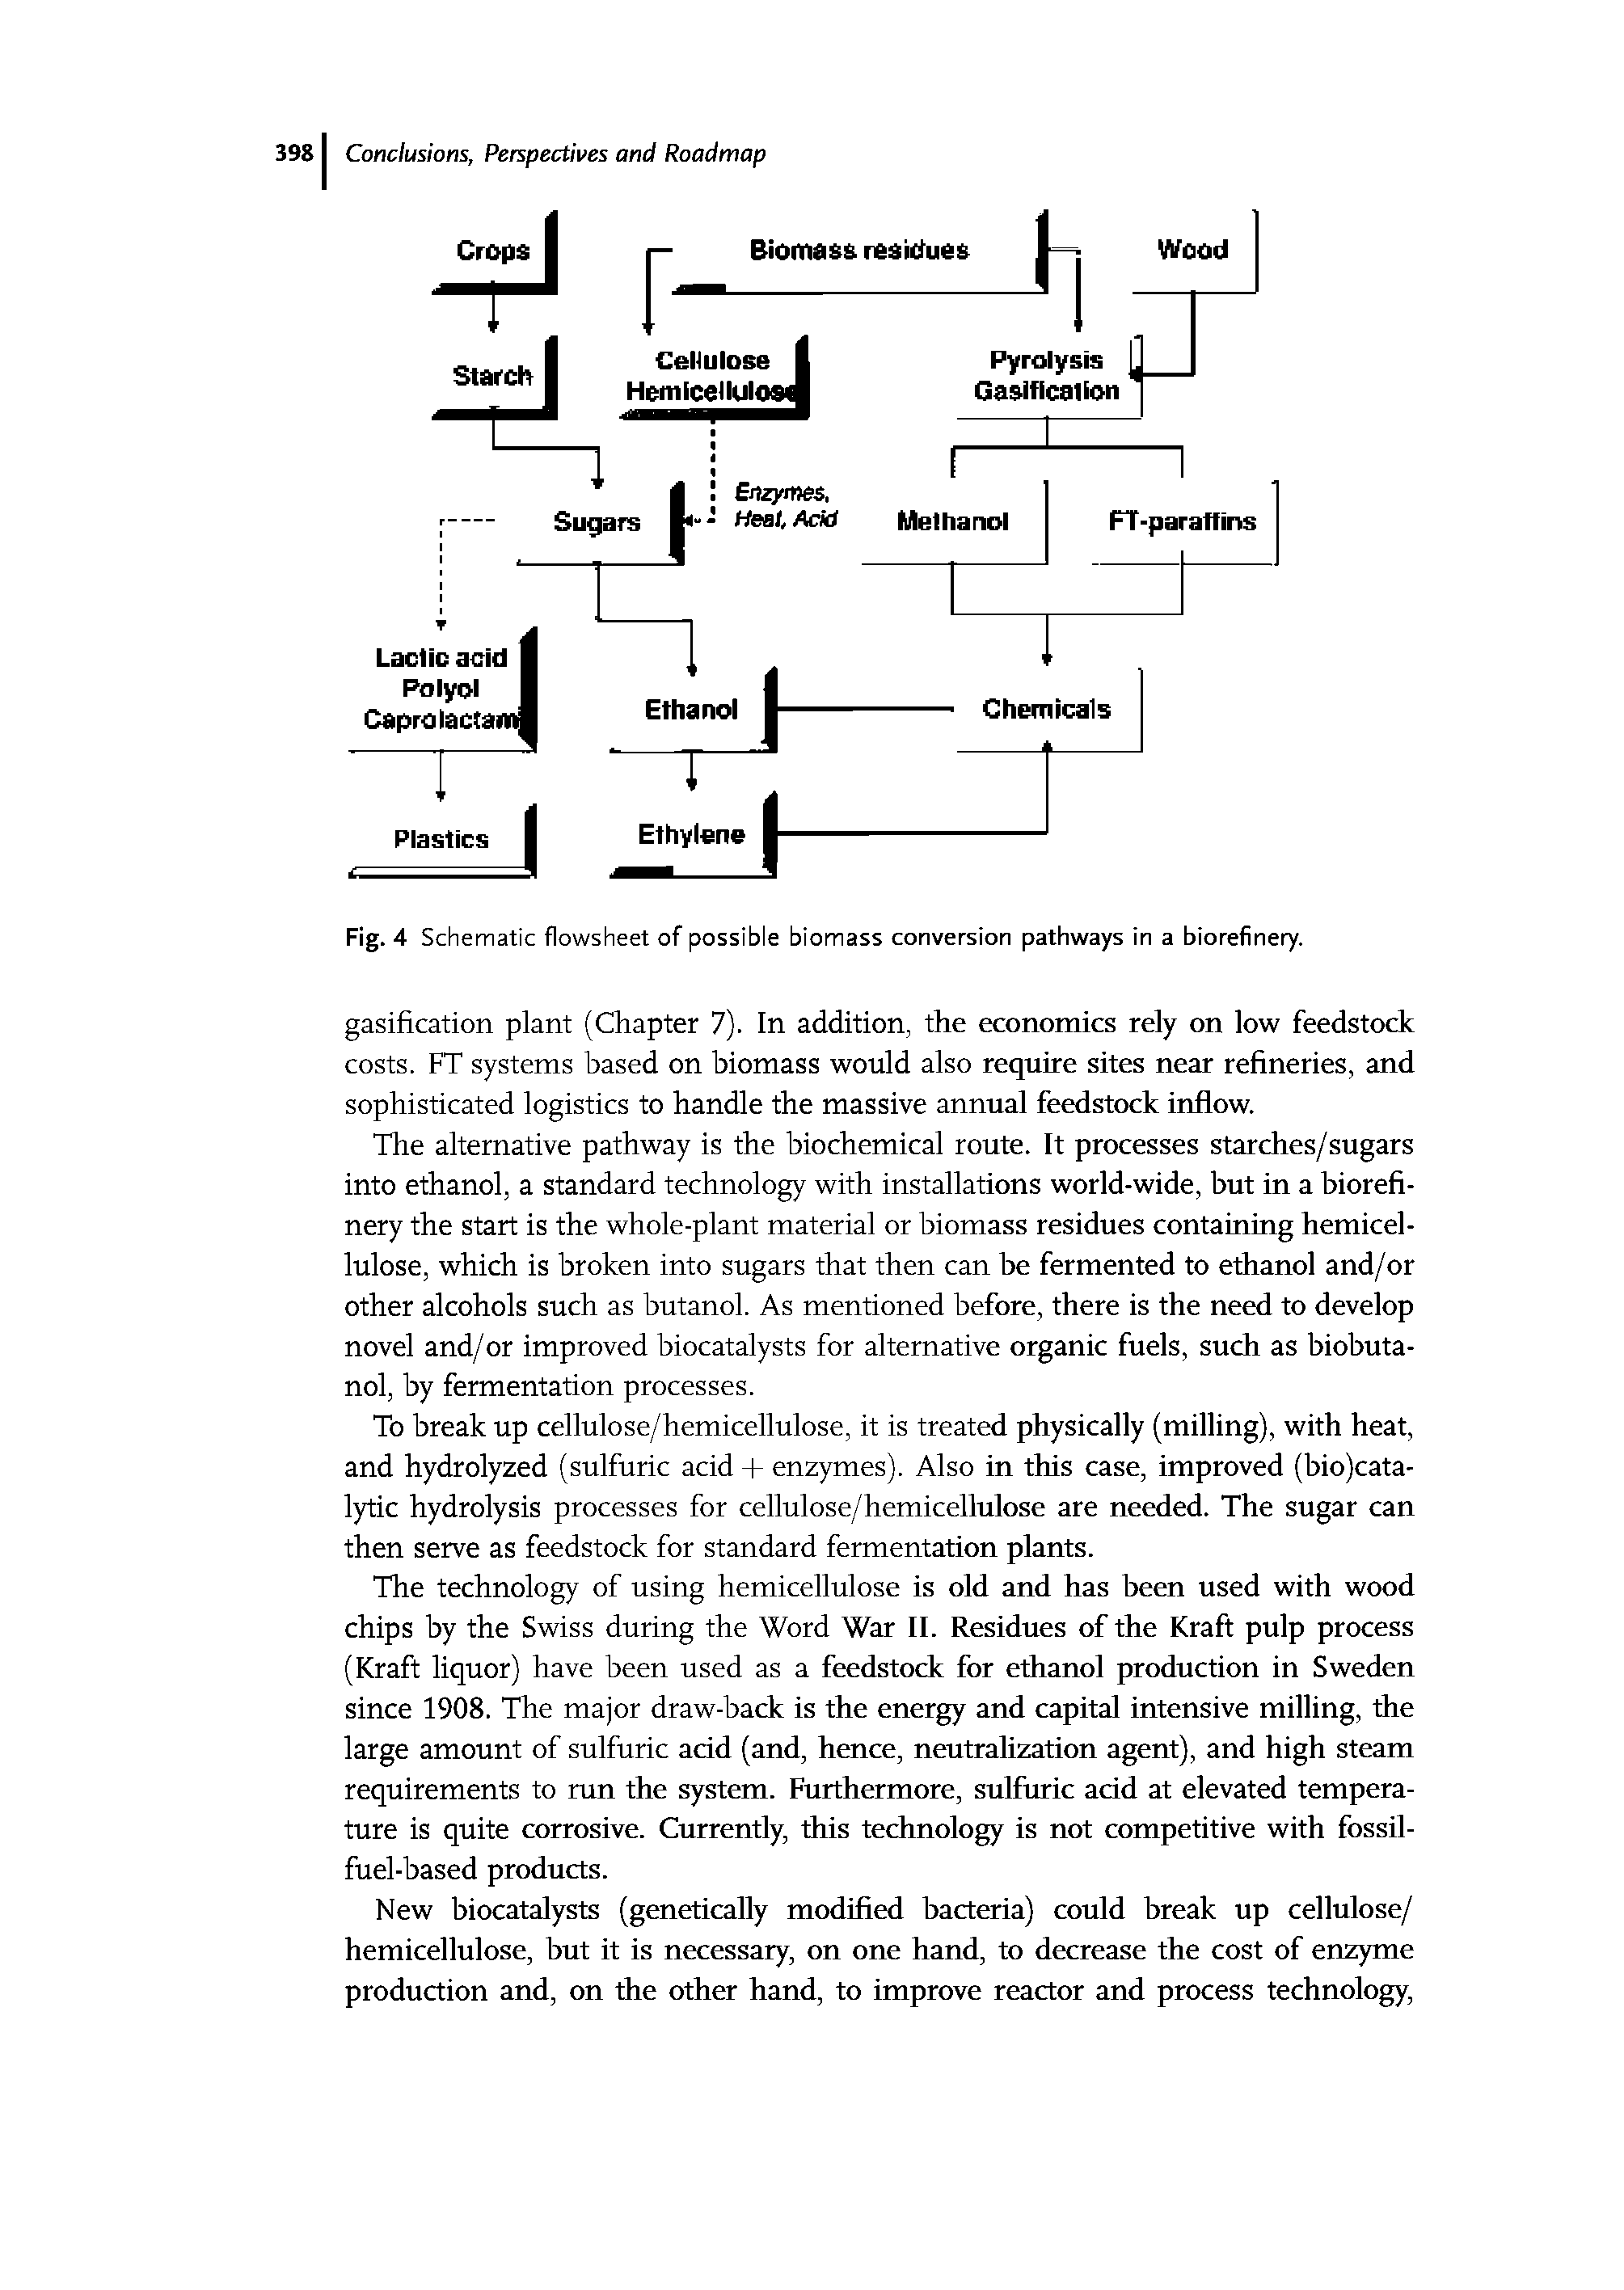 Fig. 4 Schematic flowsheet of possible biomass conversion pathways in a biorefinery.